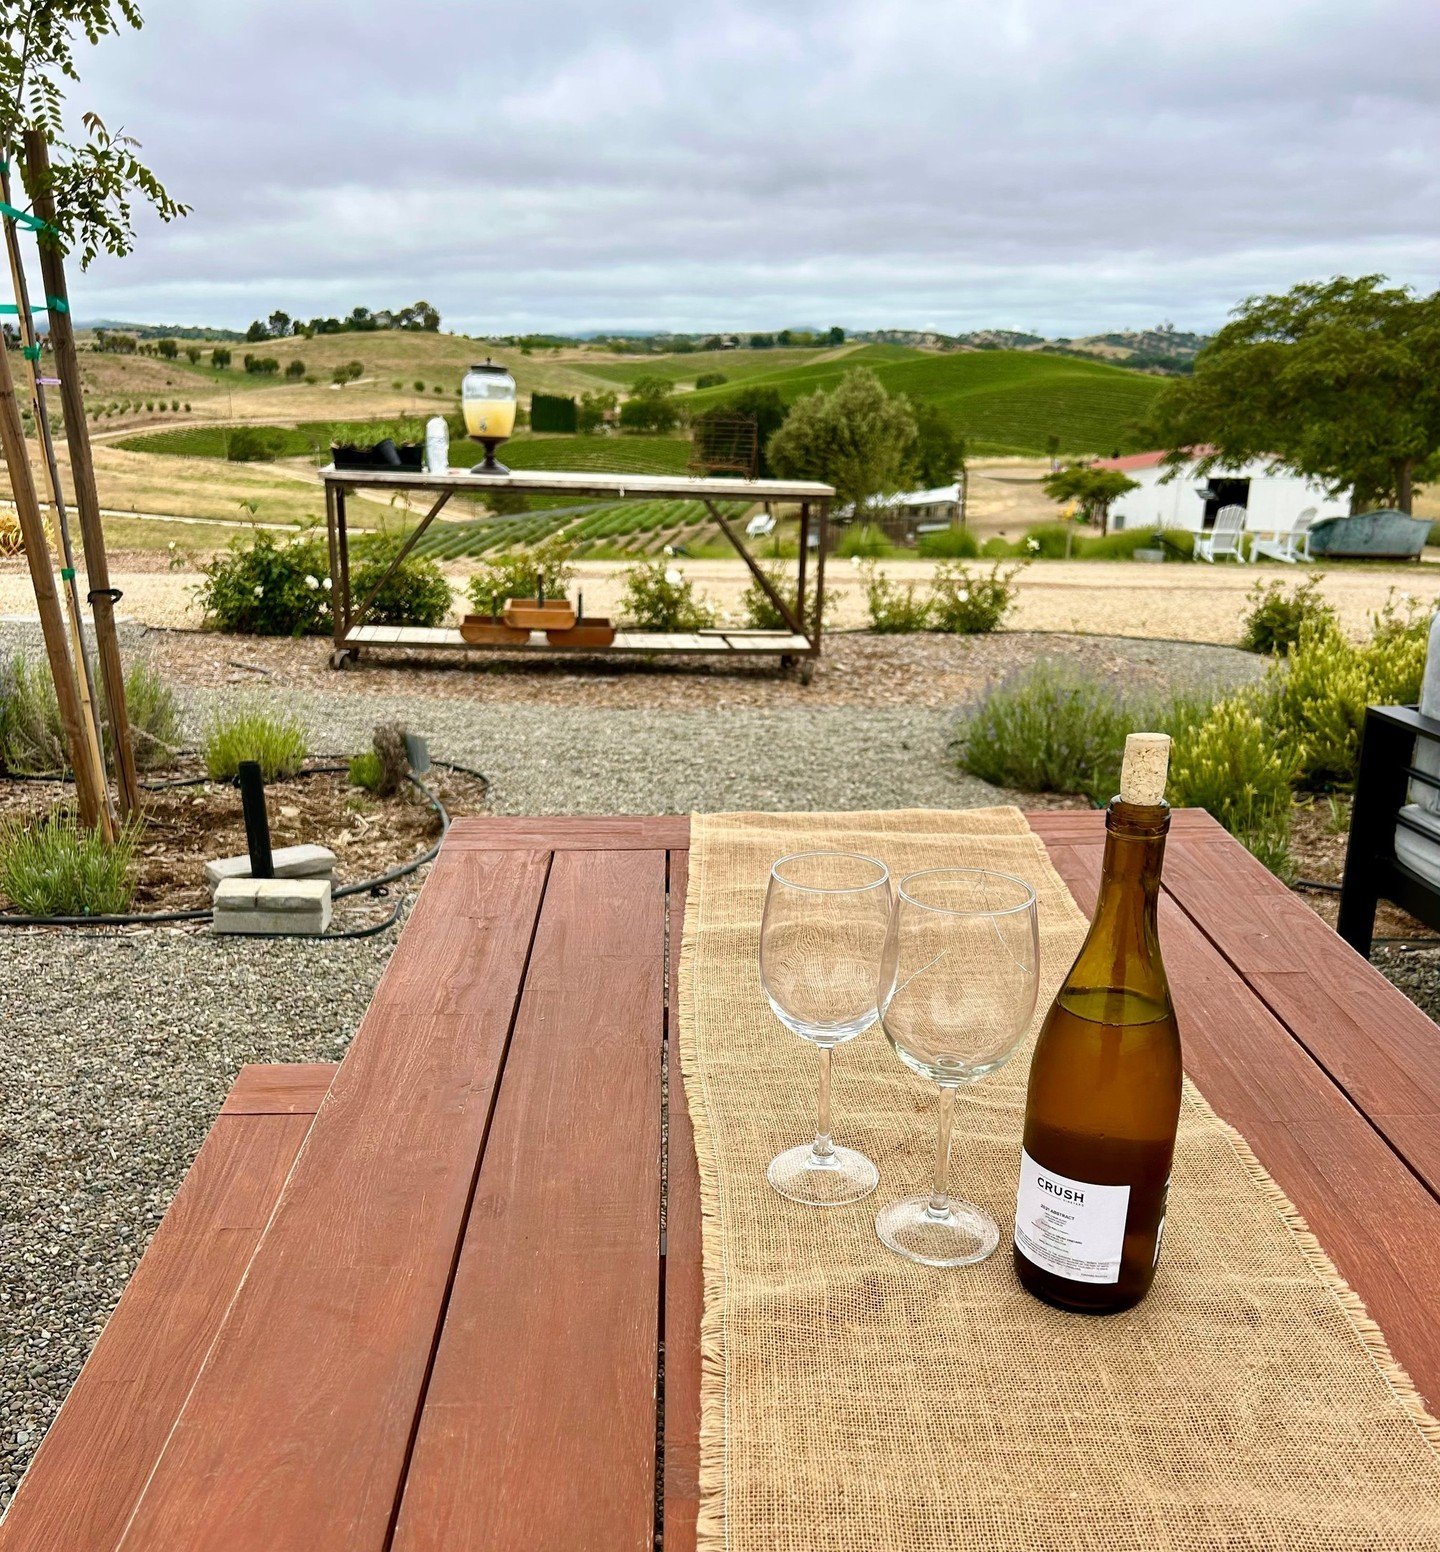 Hey Wine Fest-ers!!! 👋🍷 ⁠
⁠
Why don't you bring your favorite bottle to Hambly Farms and enjoy that wine with a view? ⁠
⁠
We're open all day today, Sunday, and Monday from 10am-4pm so don't leave town without coming to see the lavender farm! It's t